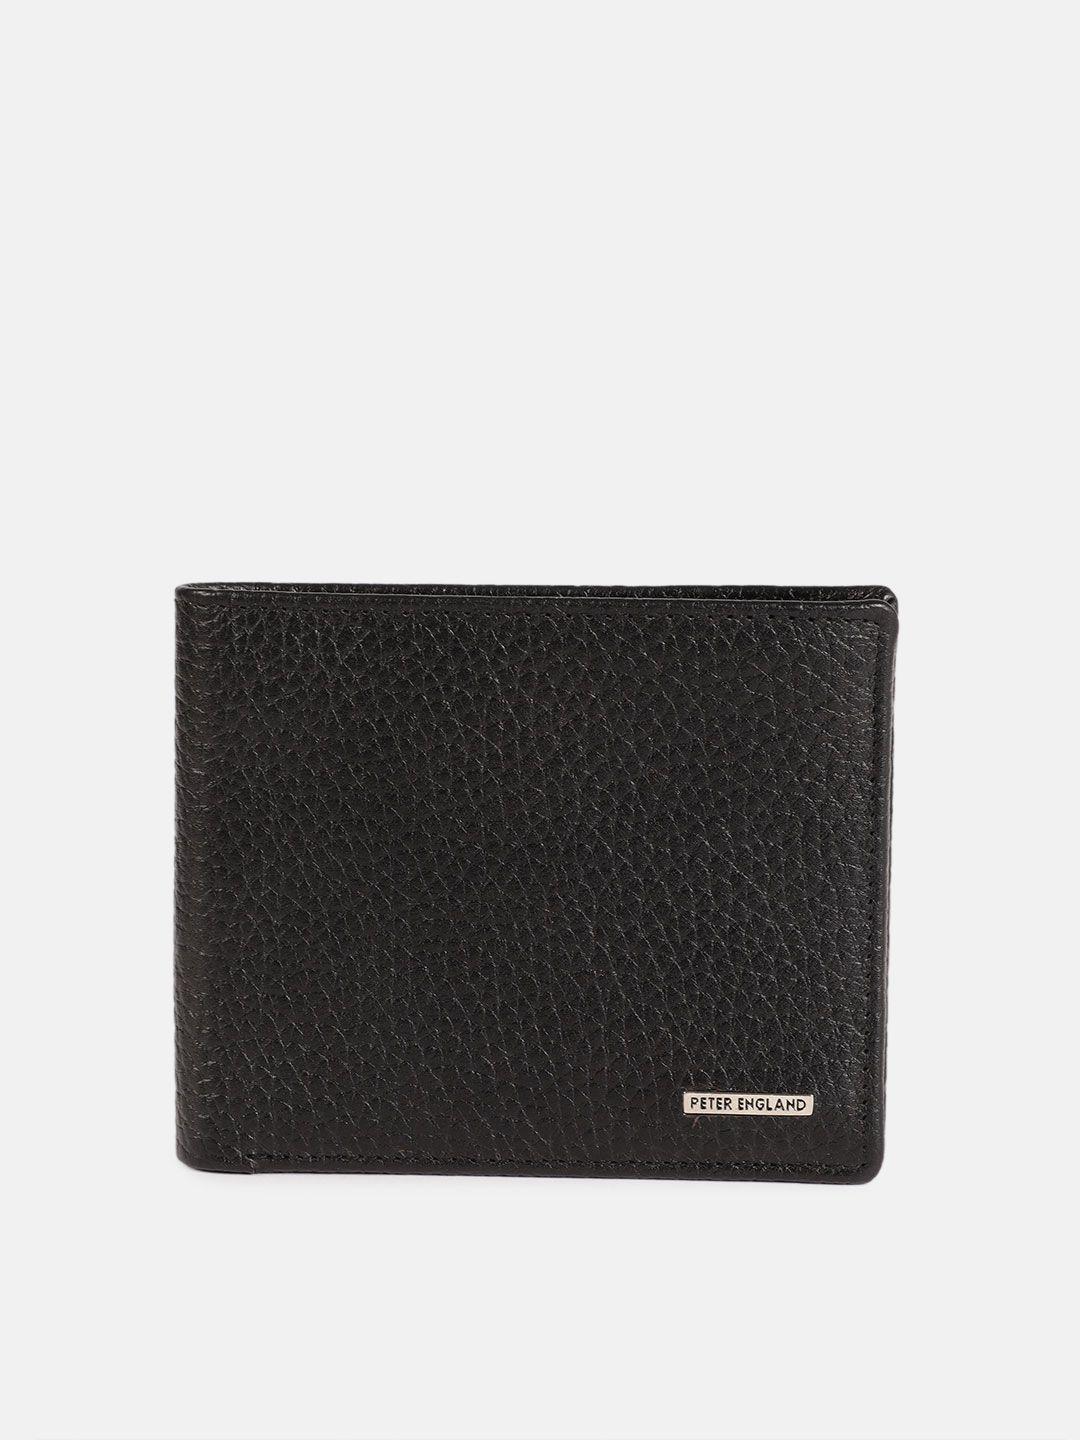 peter england men black textured two fold leather wallet